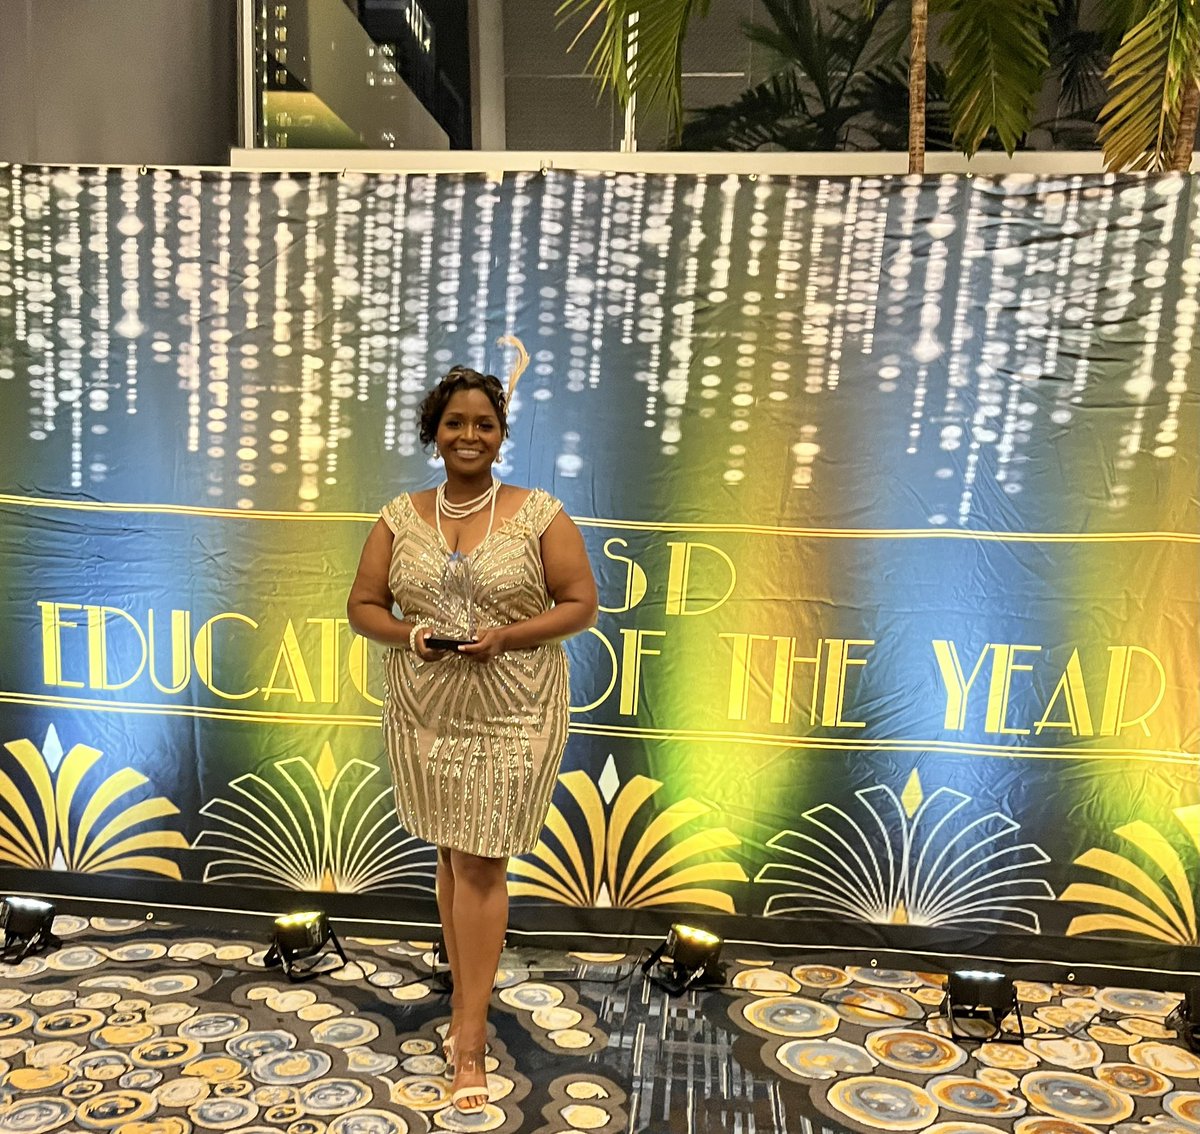 Congratulations to the Social Worker of the Year! #EOY #promotingexcellence @HoustonISD @Dra_CastilloC @GlendaCalloway1 @TeamHISD